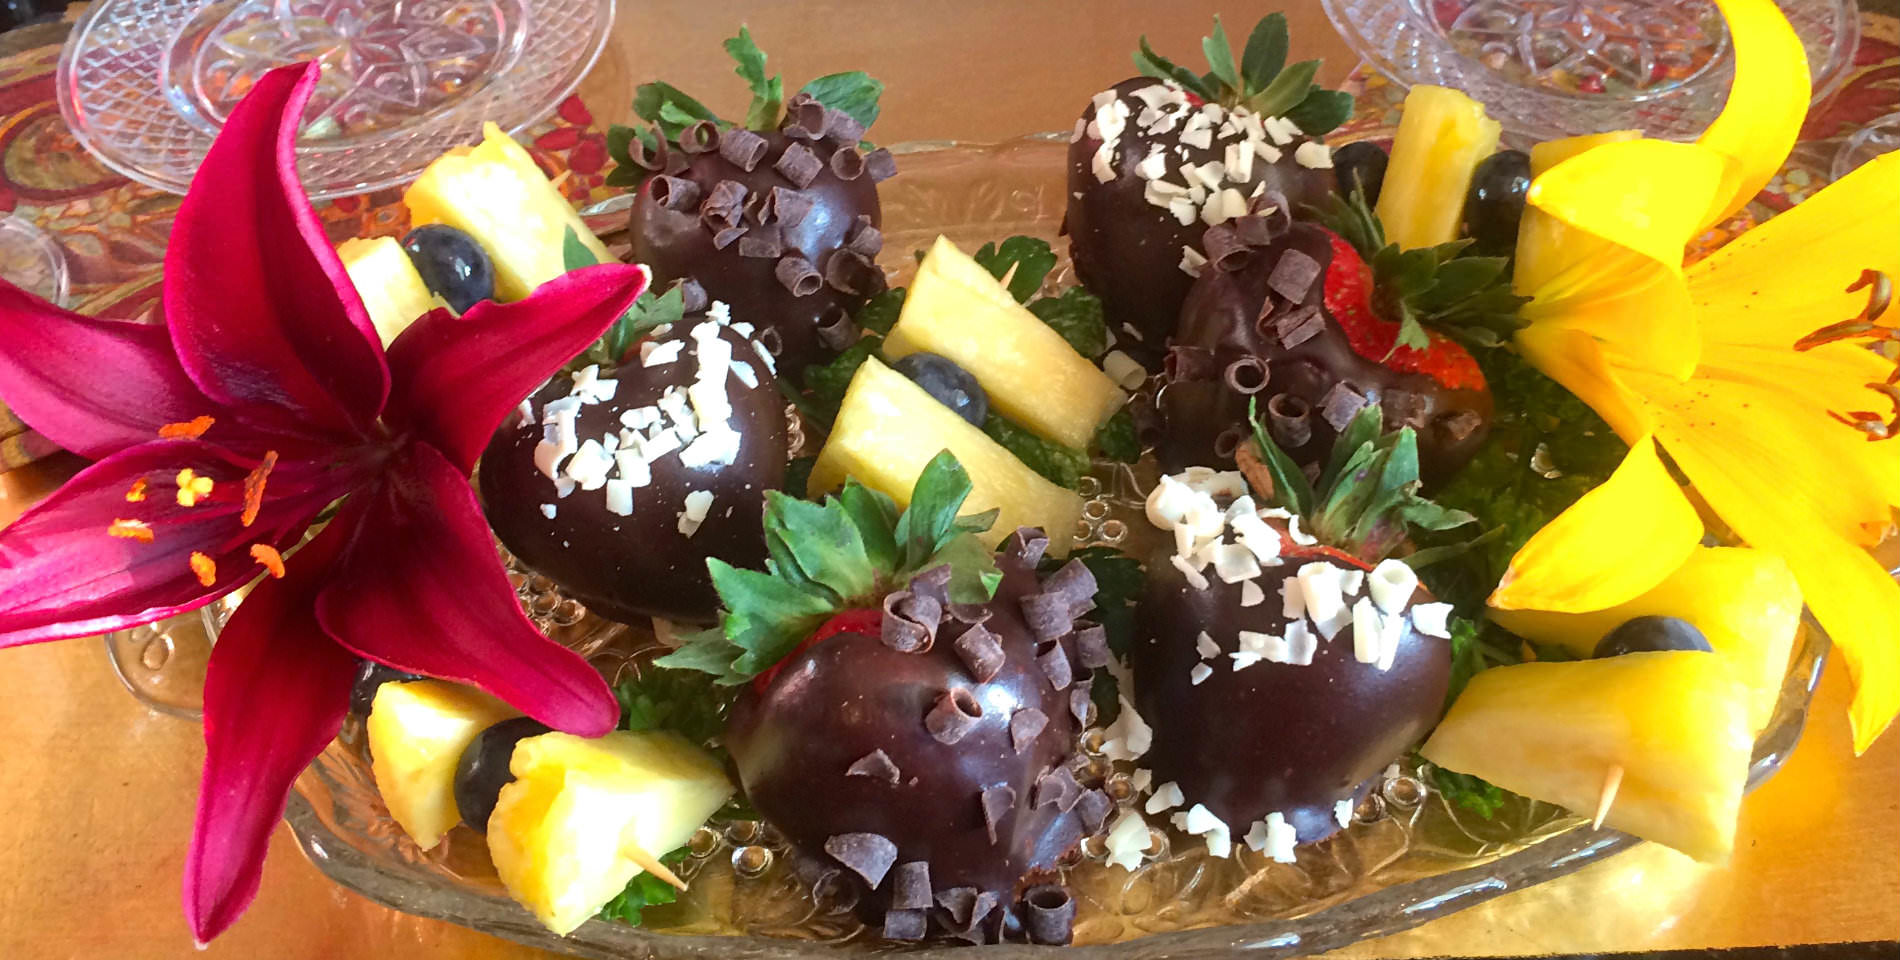 Rich, dark chocolate covered strawberries with green leaves sit in a glass bowl on a table.